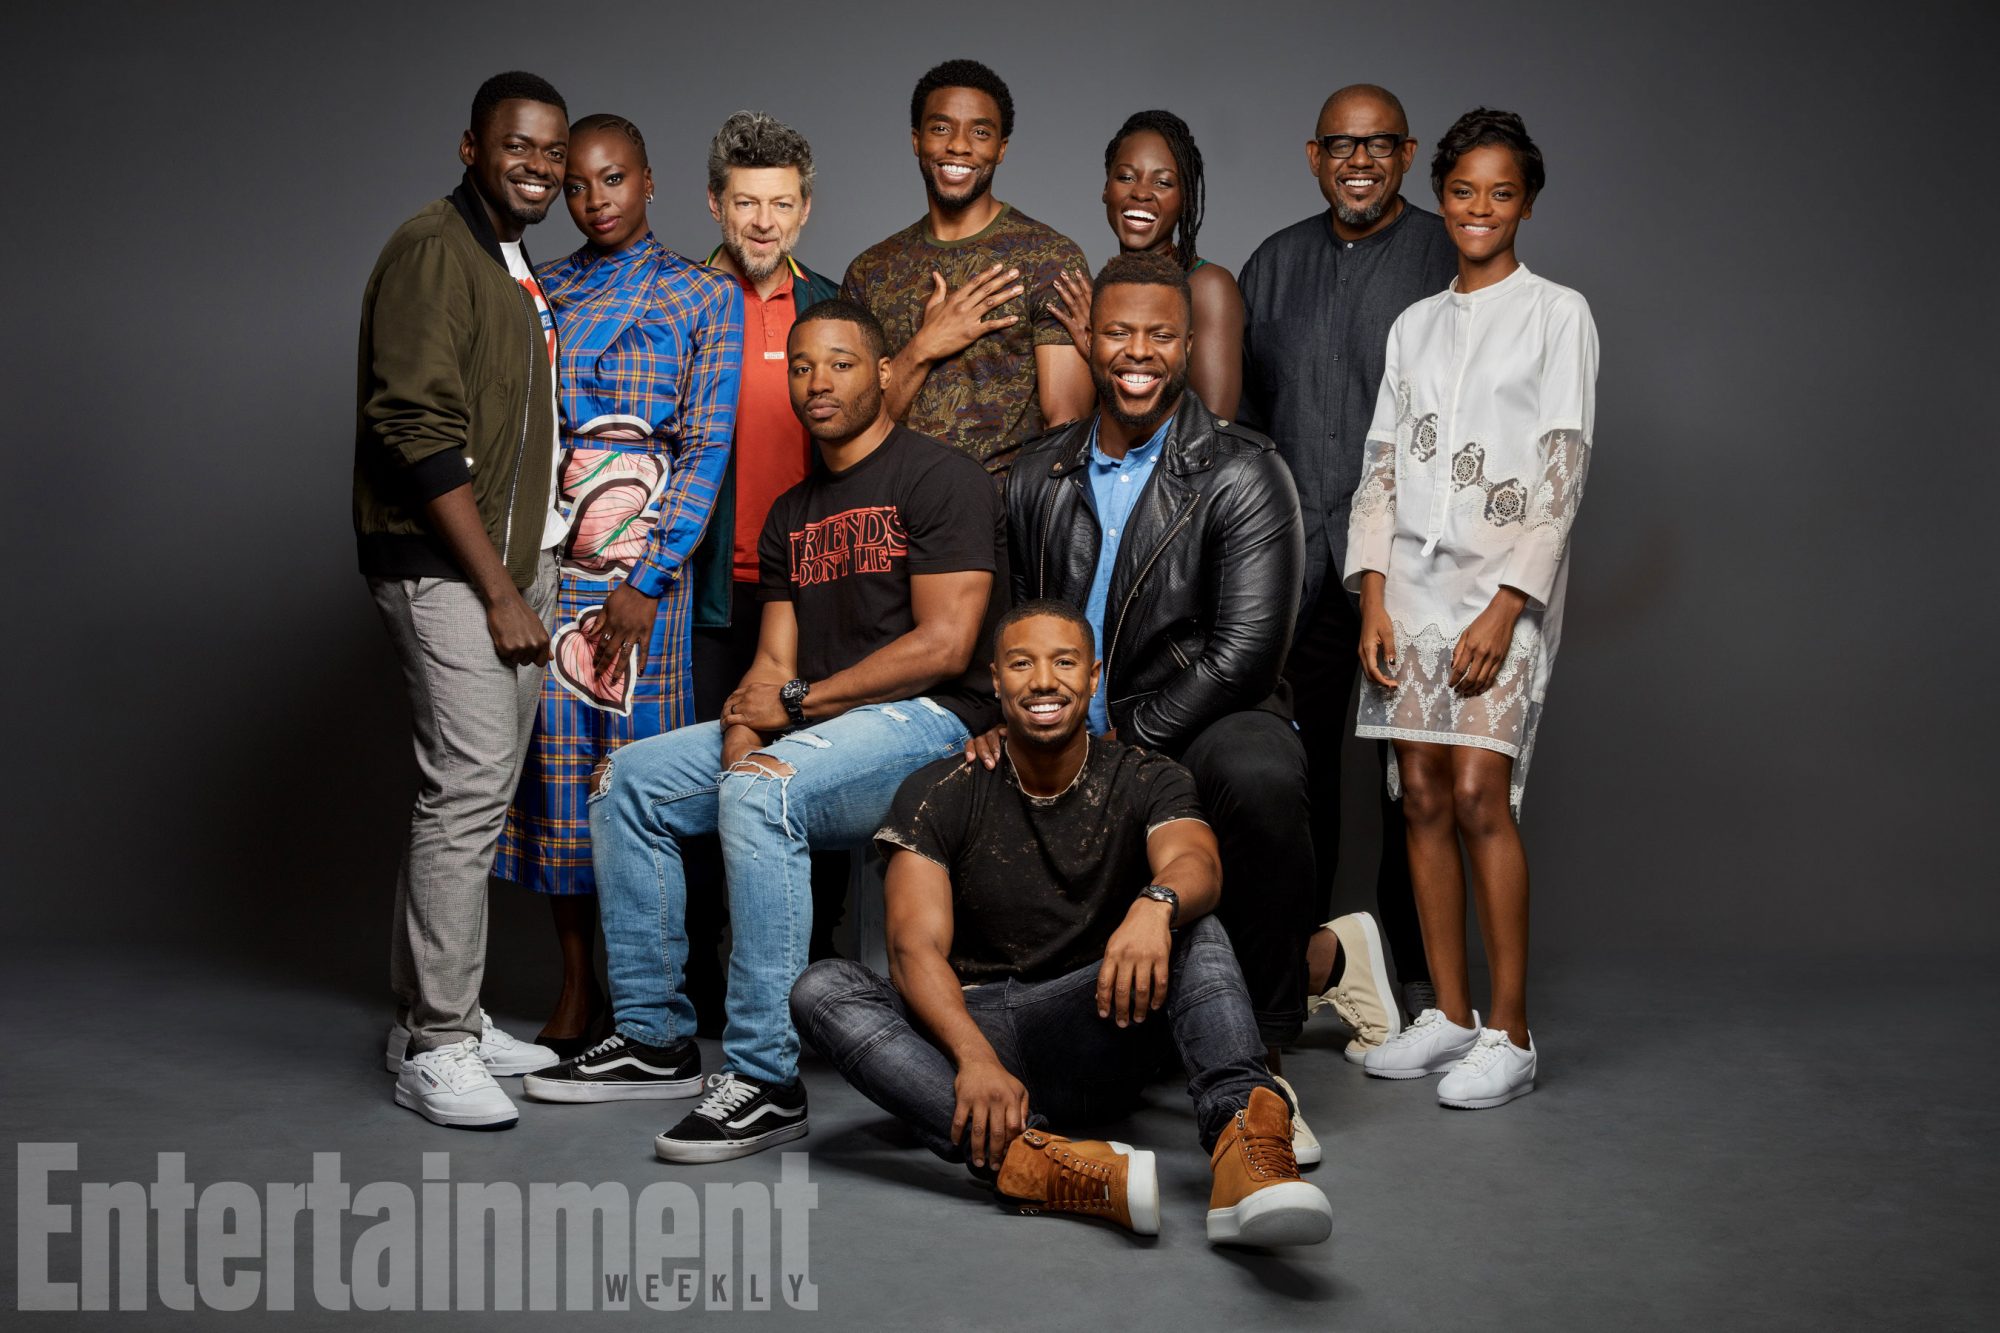 Black Panther Movie Cast Wallpapers